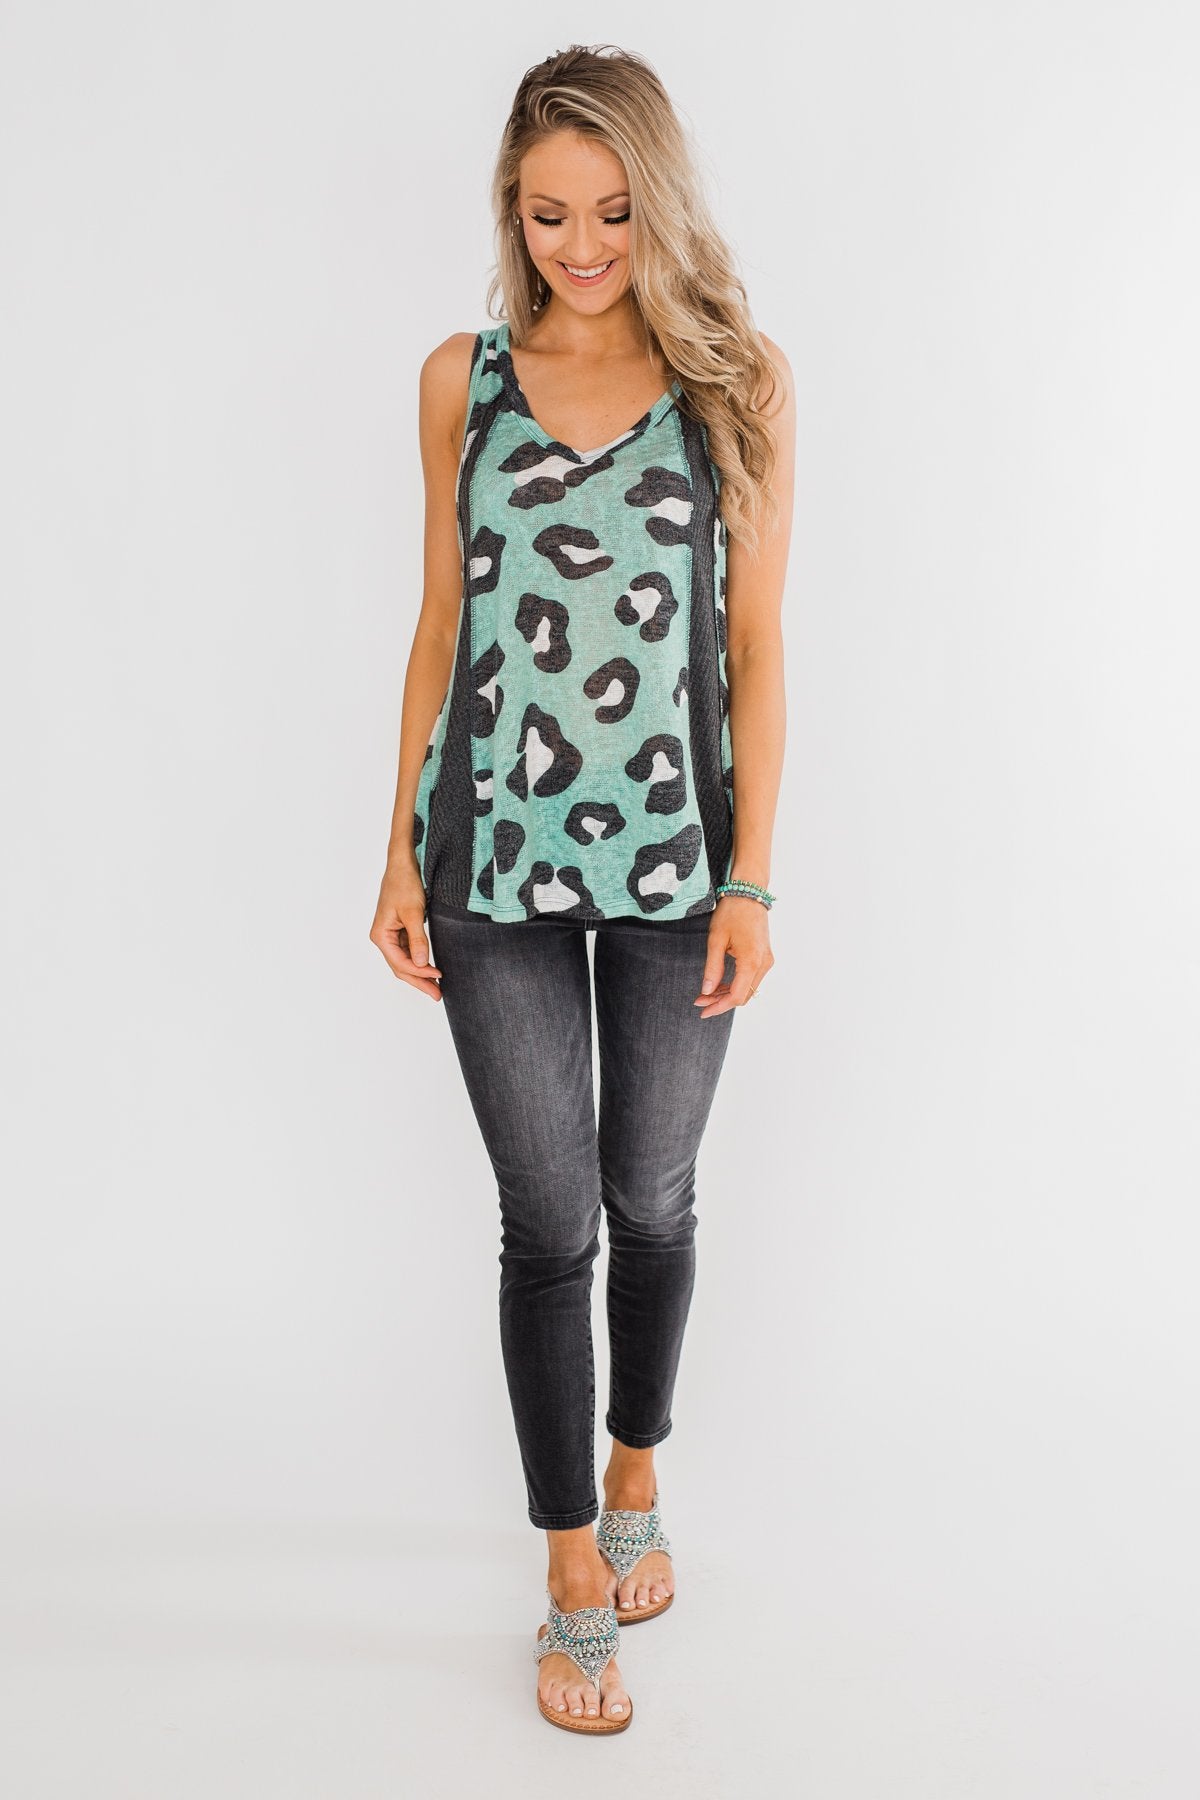 Walk On The Wild Side Tank Top- Charcoal & Teal